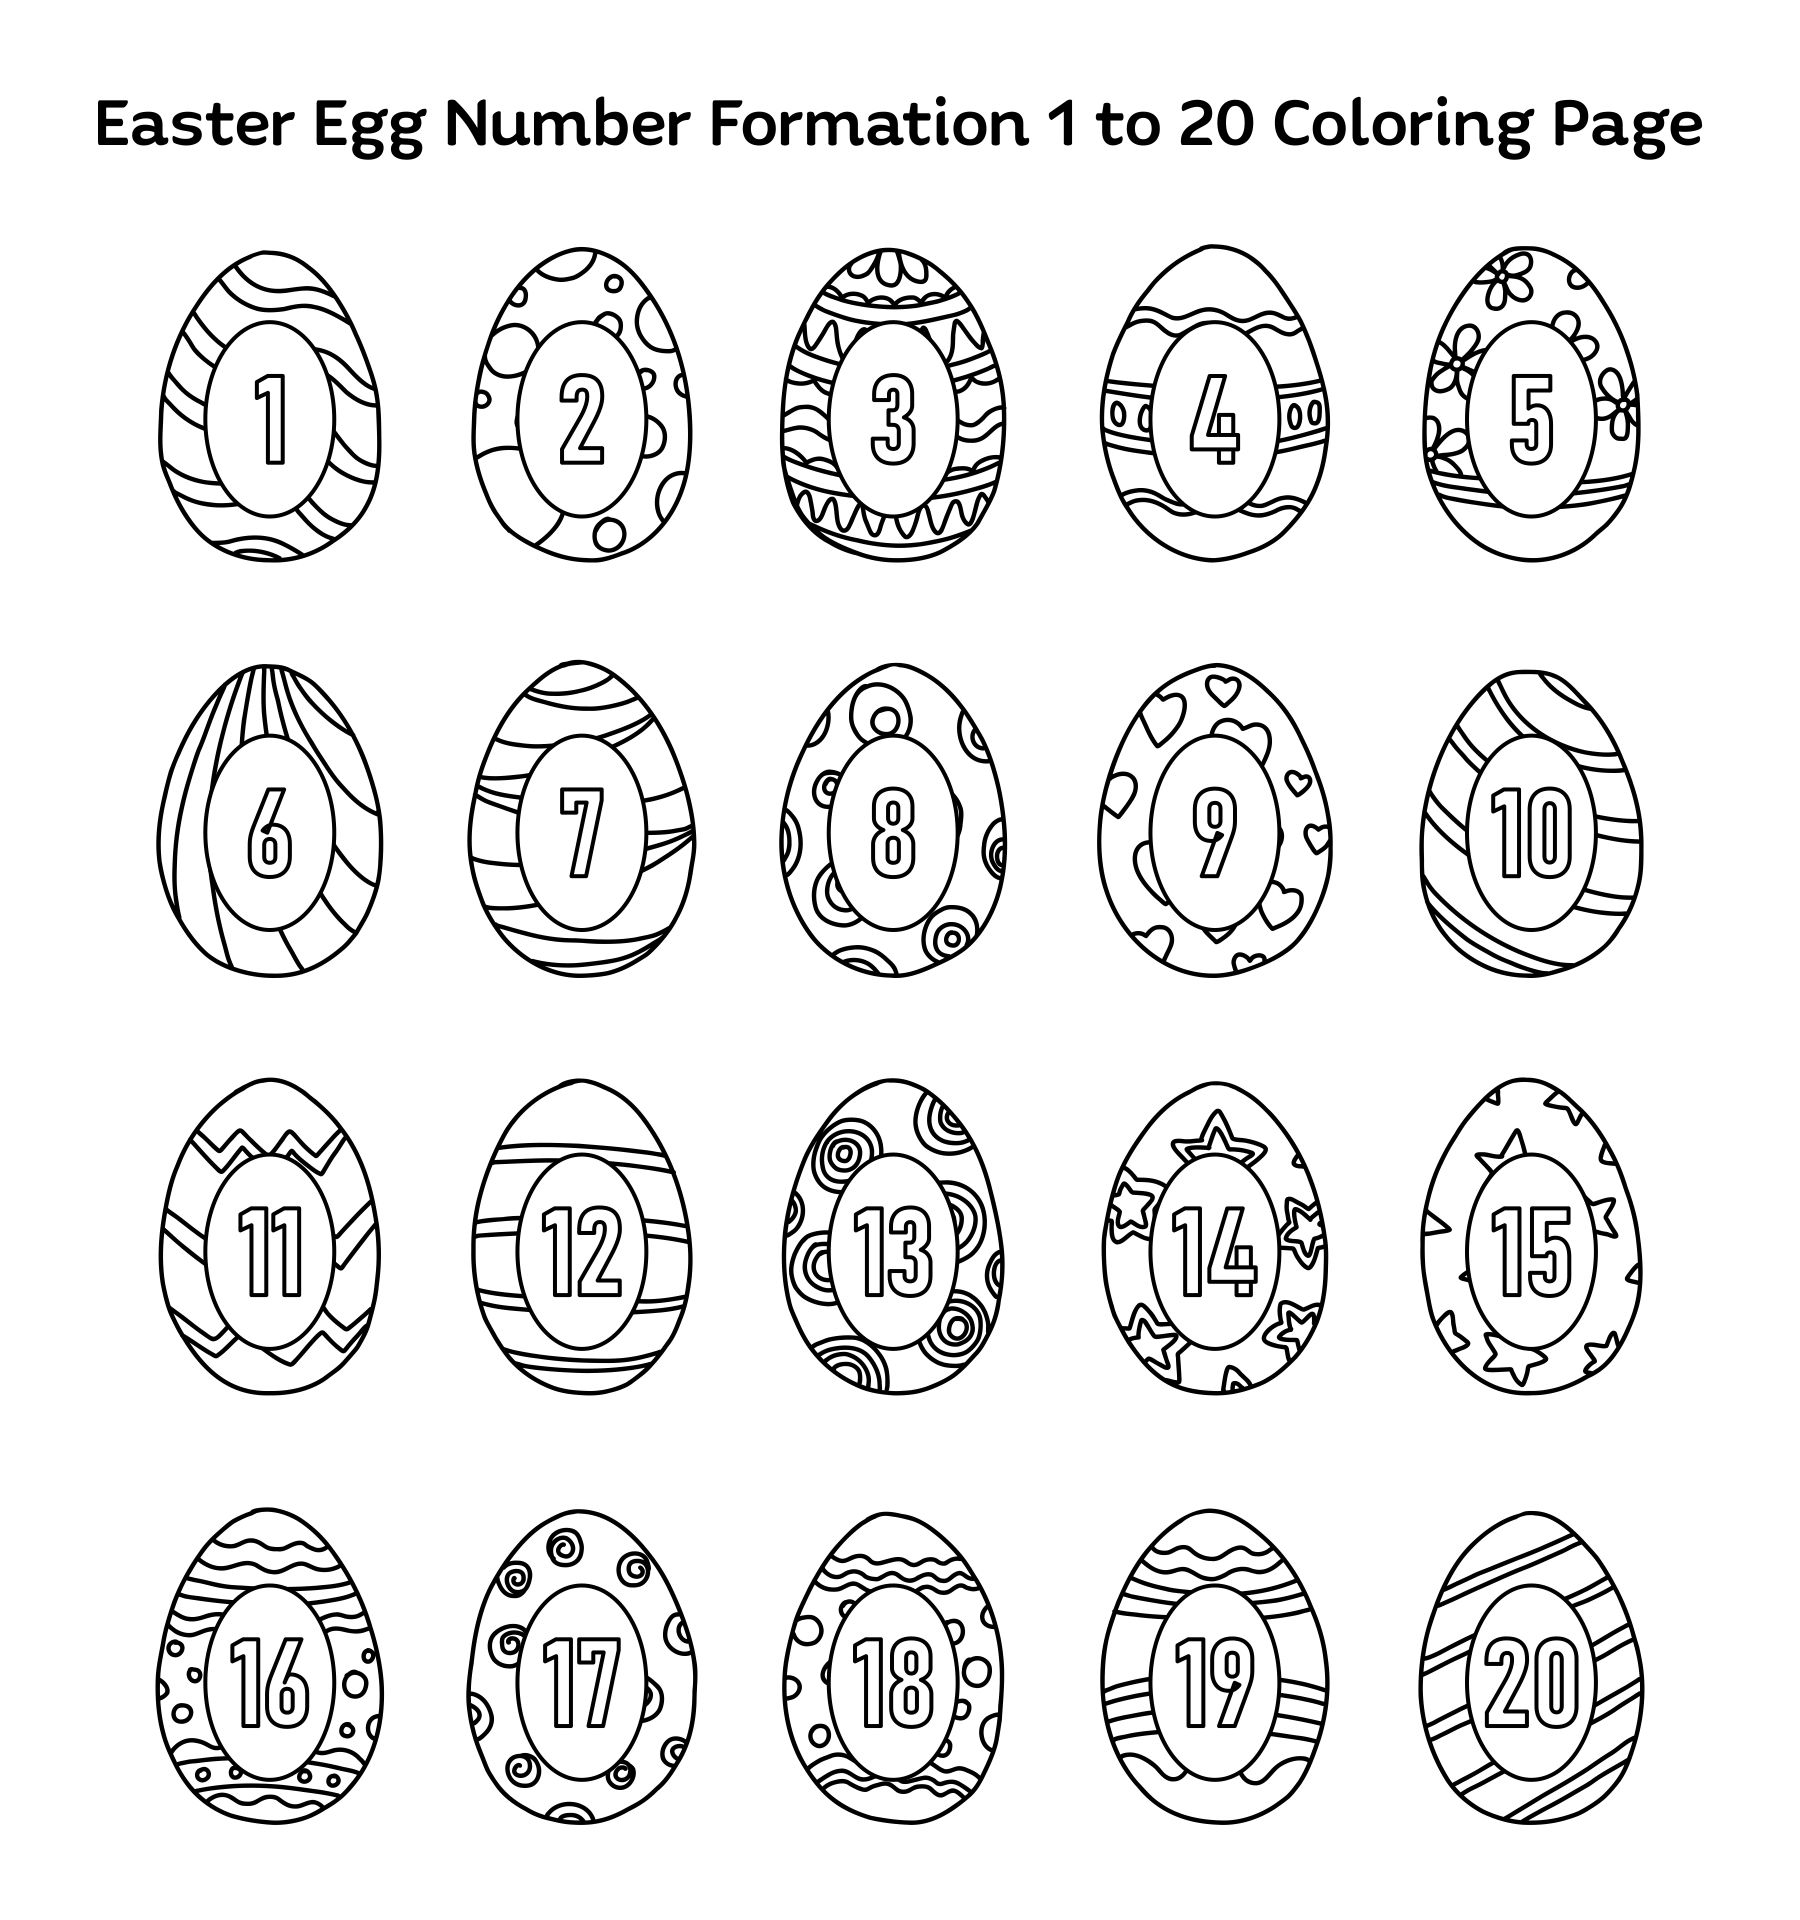 Printable Easter Egg Number Formation 1 To 20 Coloring Pages